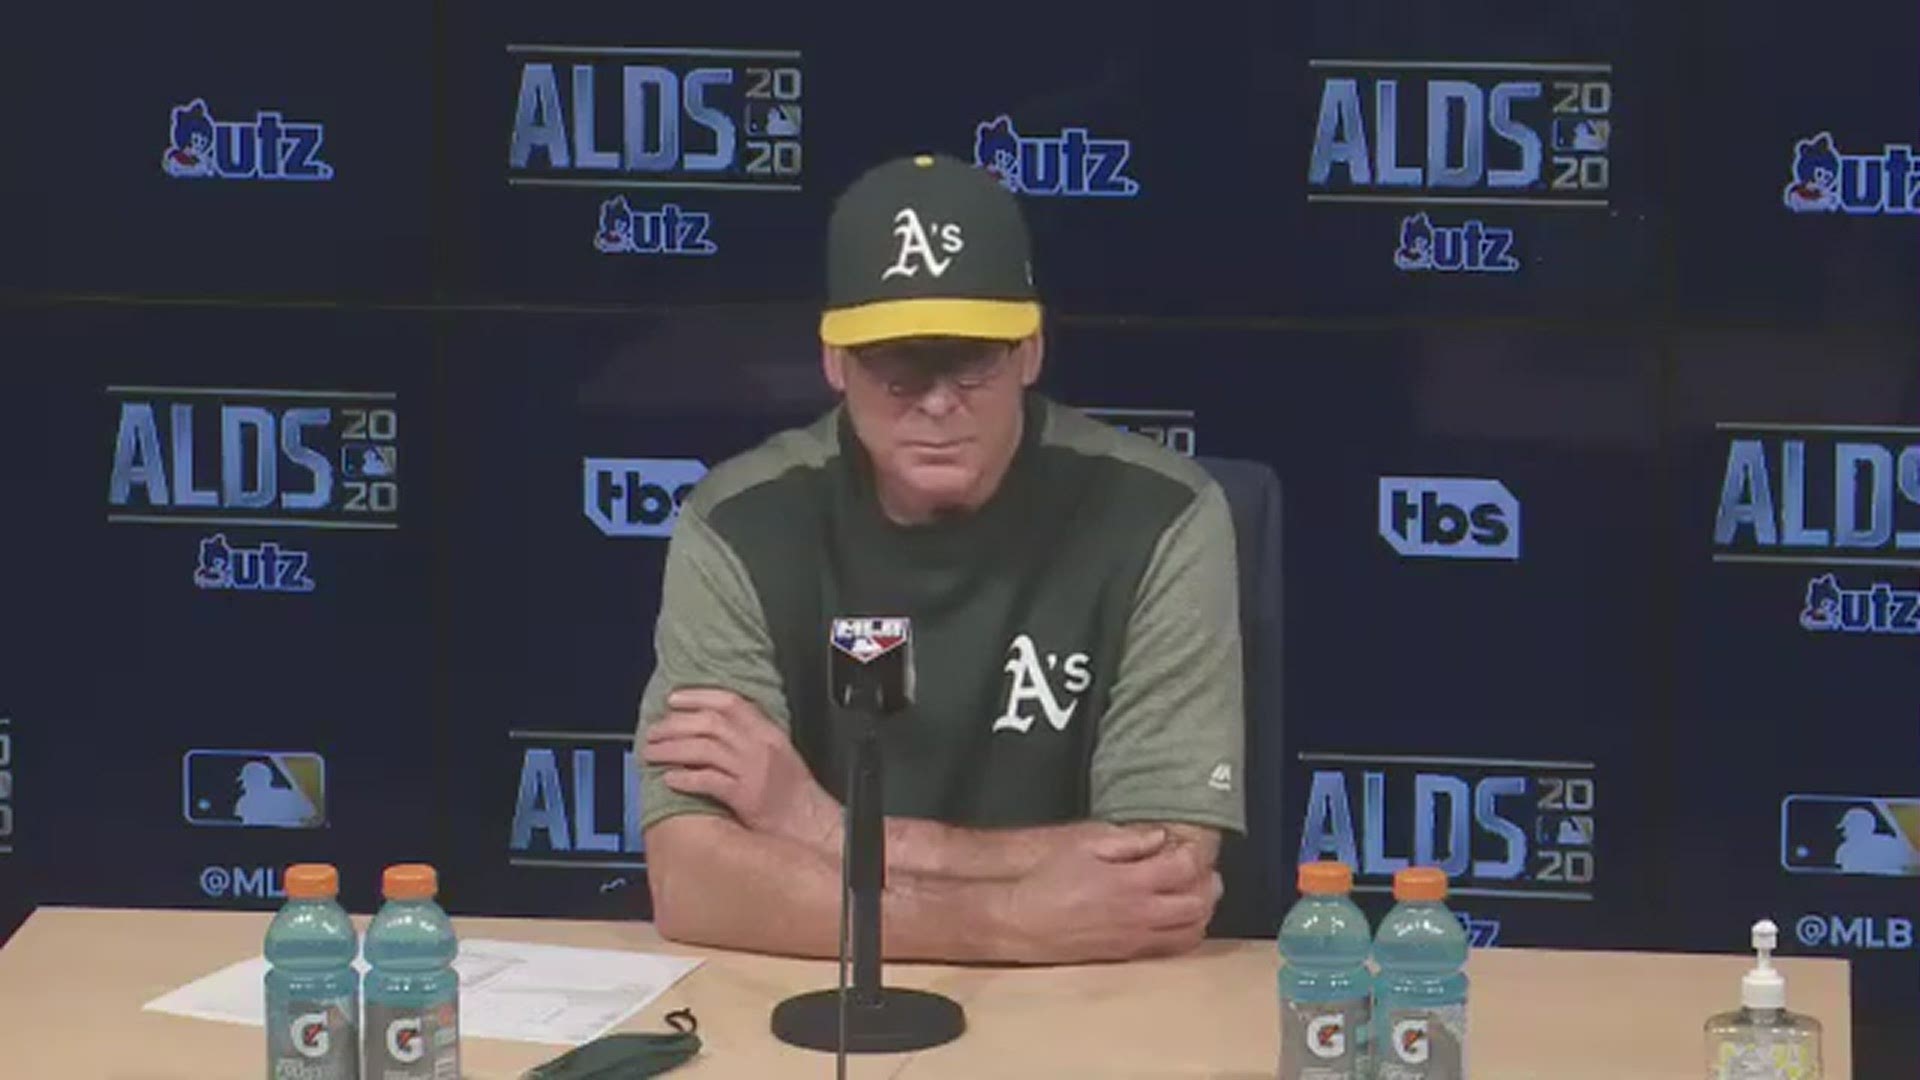 Oakland A's manager Bob Melvin discusses Monday's 10-5 loss to the Houston Astros to open the American League Division Series in Los Angeles.